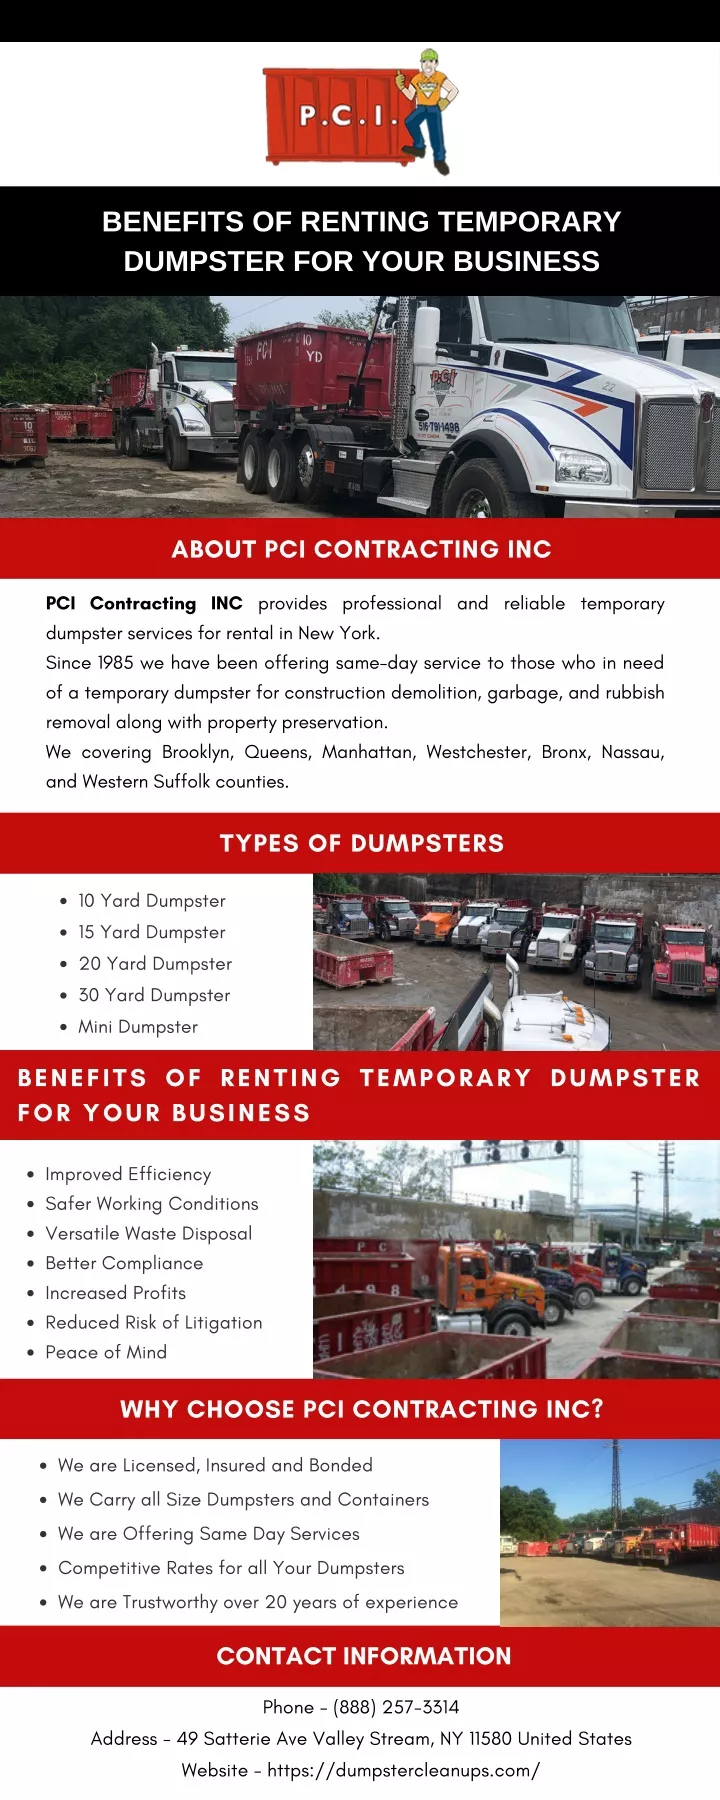 benefits of renting temporary dumpster for your